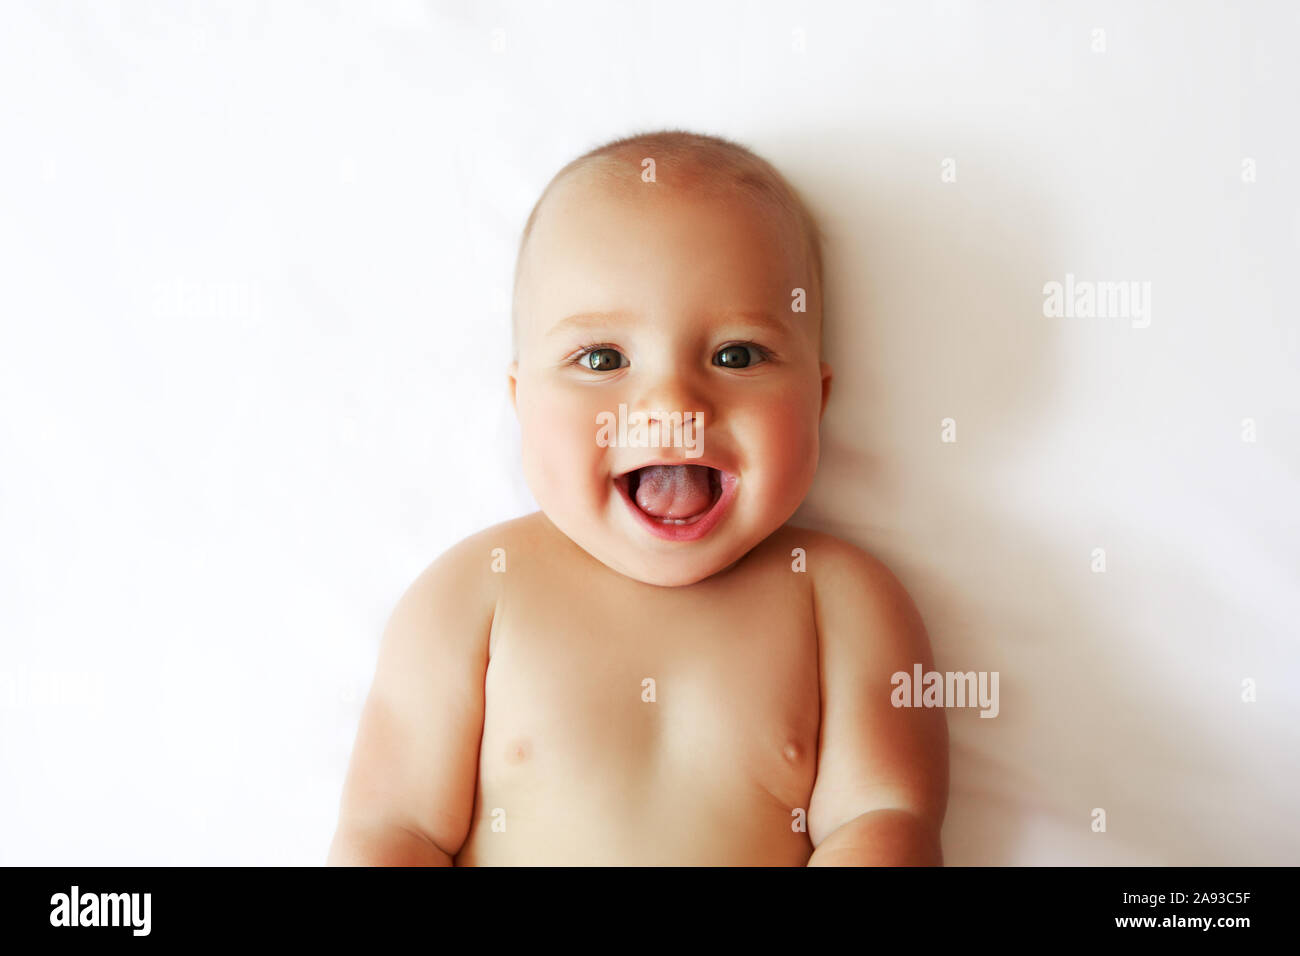 Portrait of a beautiful 6 months baby smiling, on white background. Stock Photo